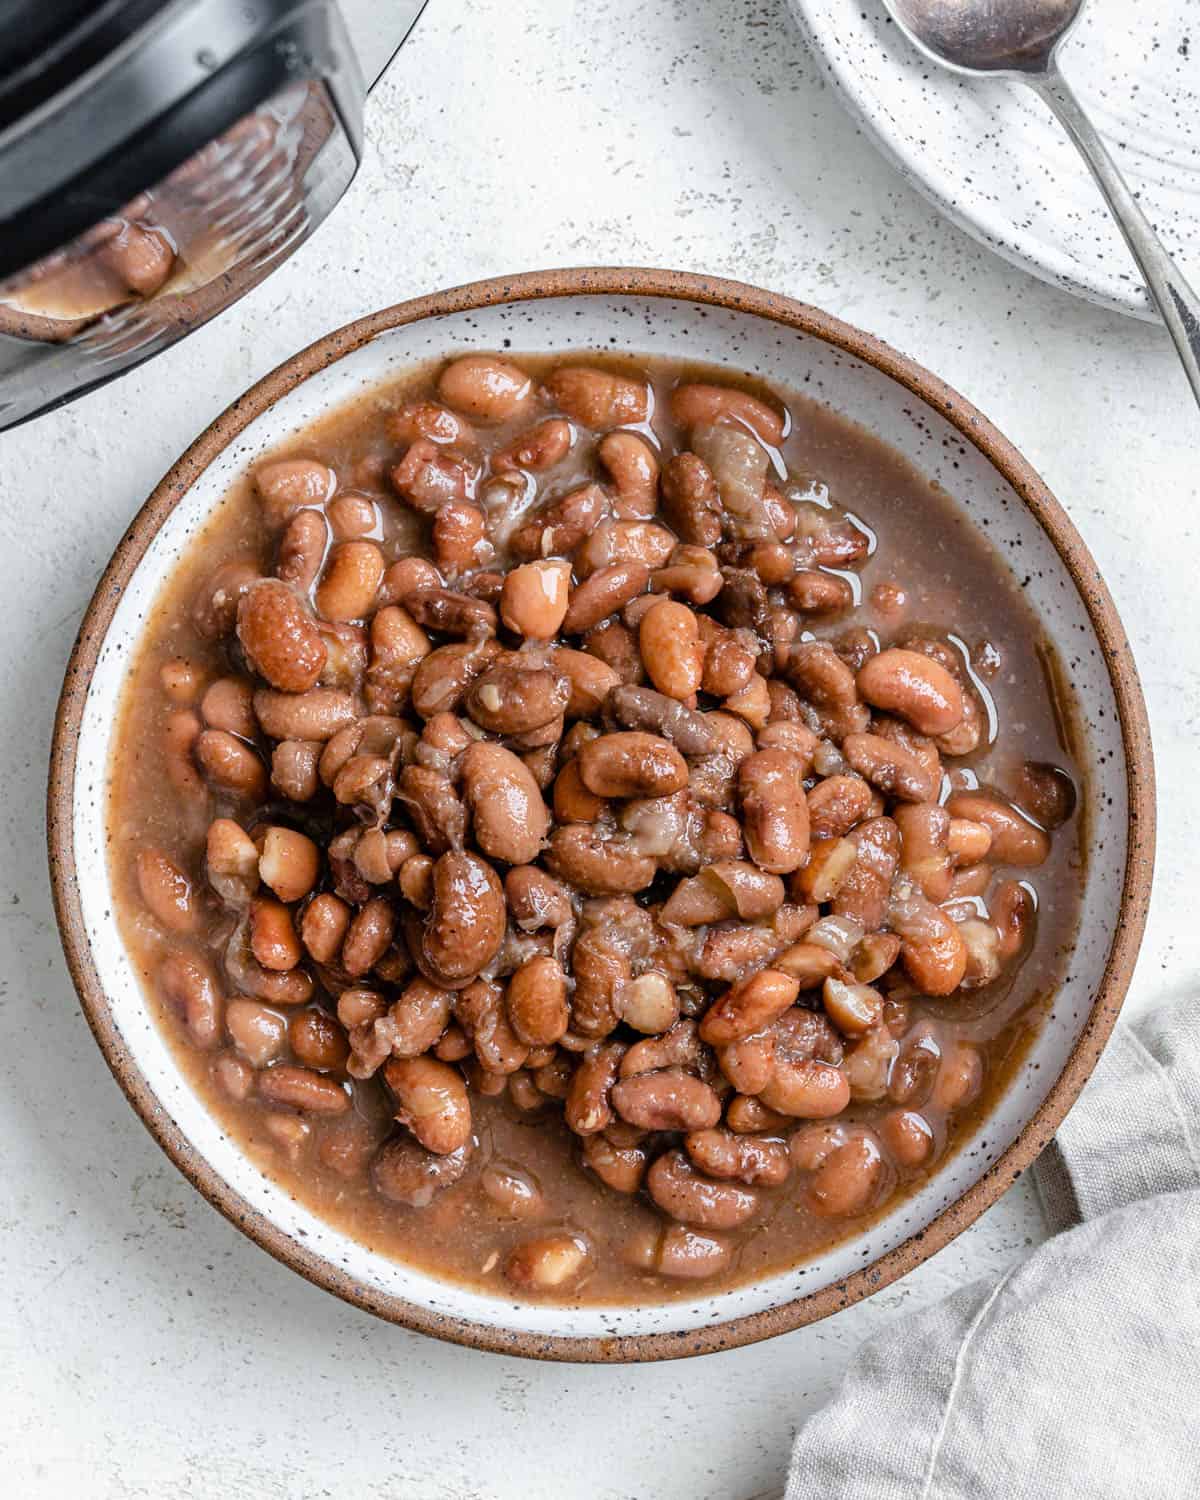 Place the finished Instant Pot pinto beans in a bowl